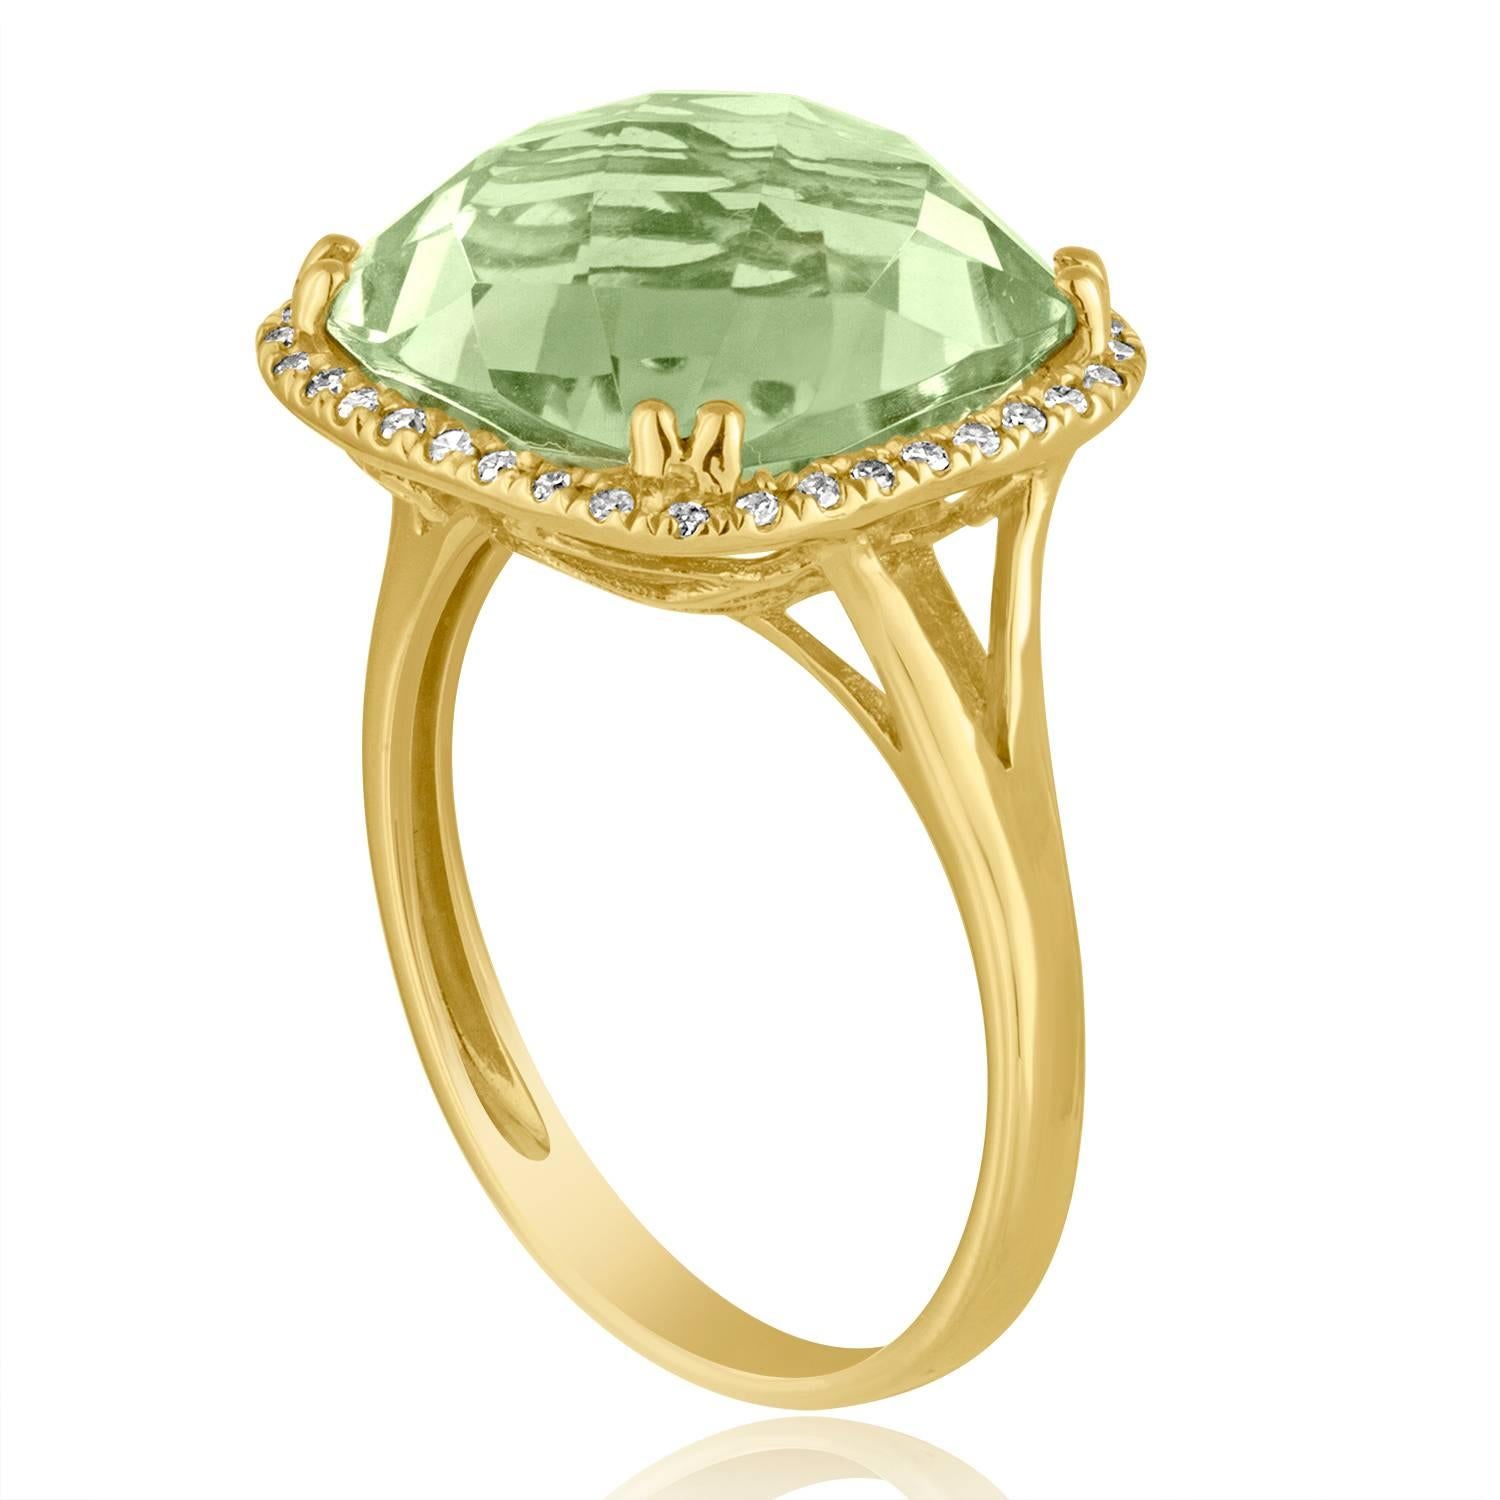 Beautifully Playful Ring
The ring is 14K Yellow Gold
There are 0.12 Carats In Diamonds G/H SI
The Center Stone is an Cushion Cut Green Amethyst 6.44 Carats
The ring measures on top 10/16